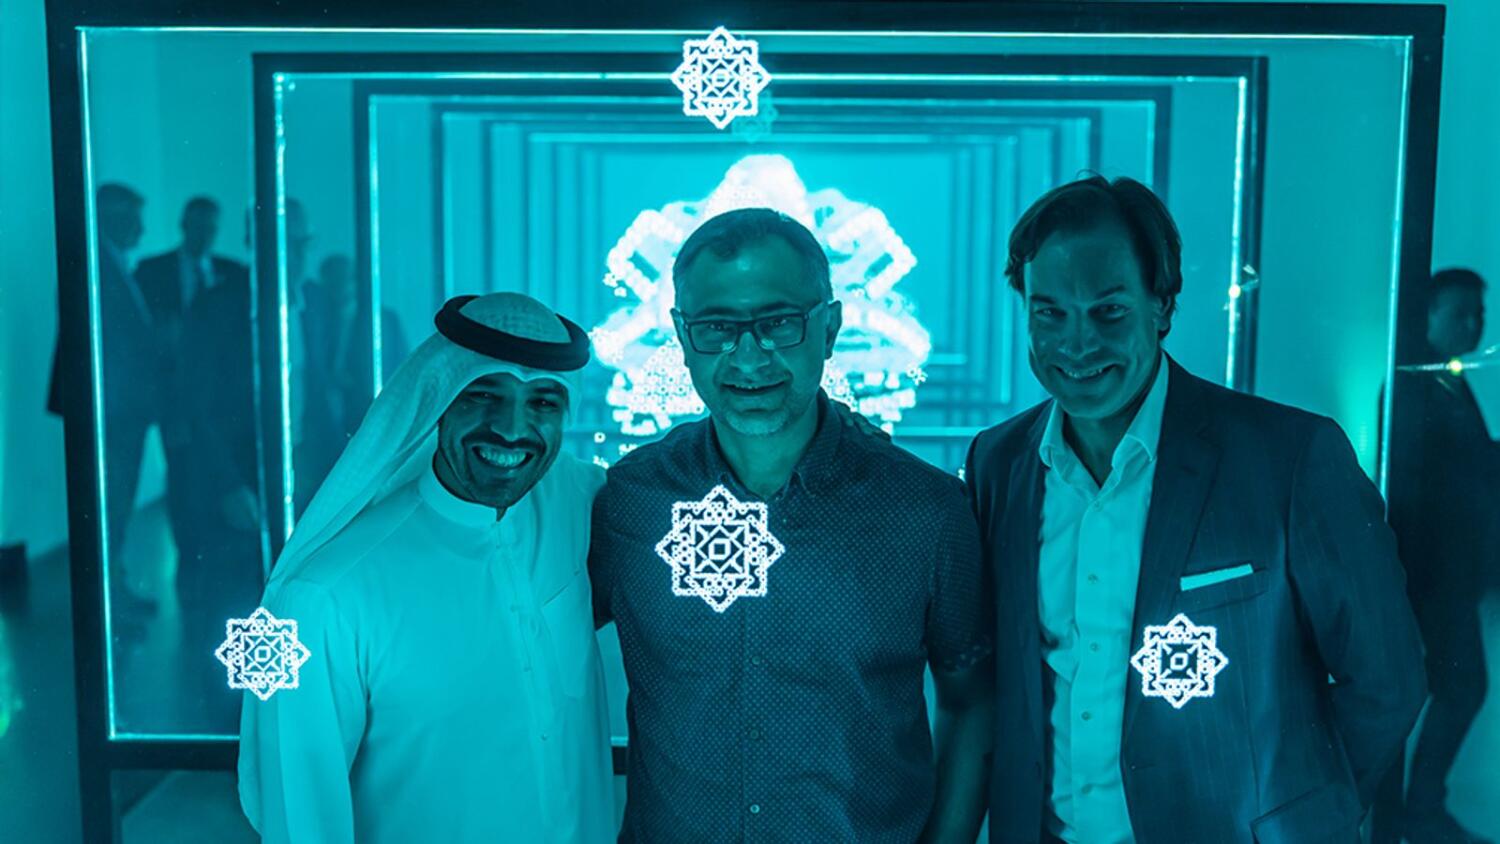 Siemens partnered with calligrapher and artist Wissam Shawkat (center) to create FABRIC, a unique perspective on the beauty, magic and vitality of numbers. (Right: Helmut von Struve, CEO of Siemens in the Middle East; left: Khalid Al Ameri, an Emirati content creator)